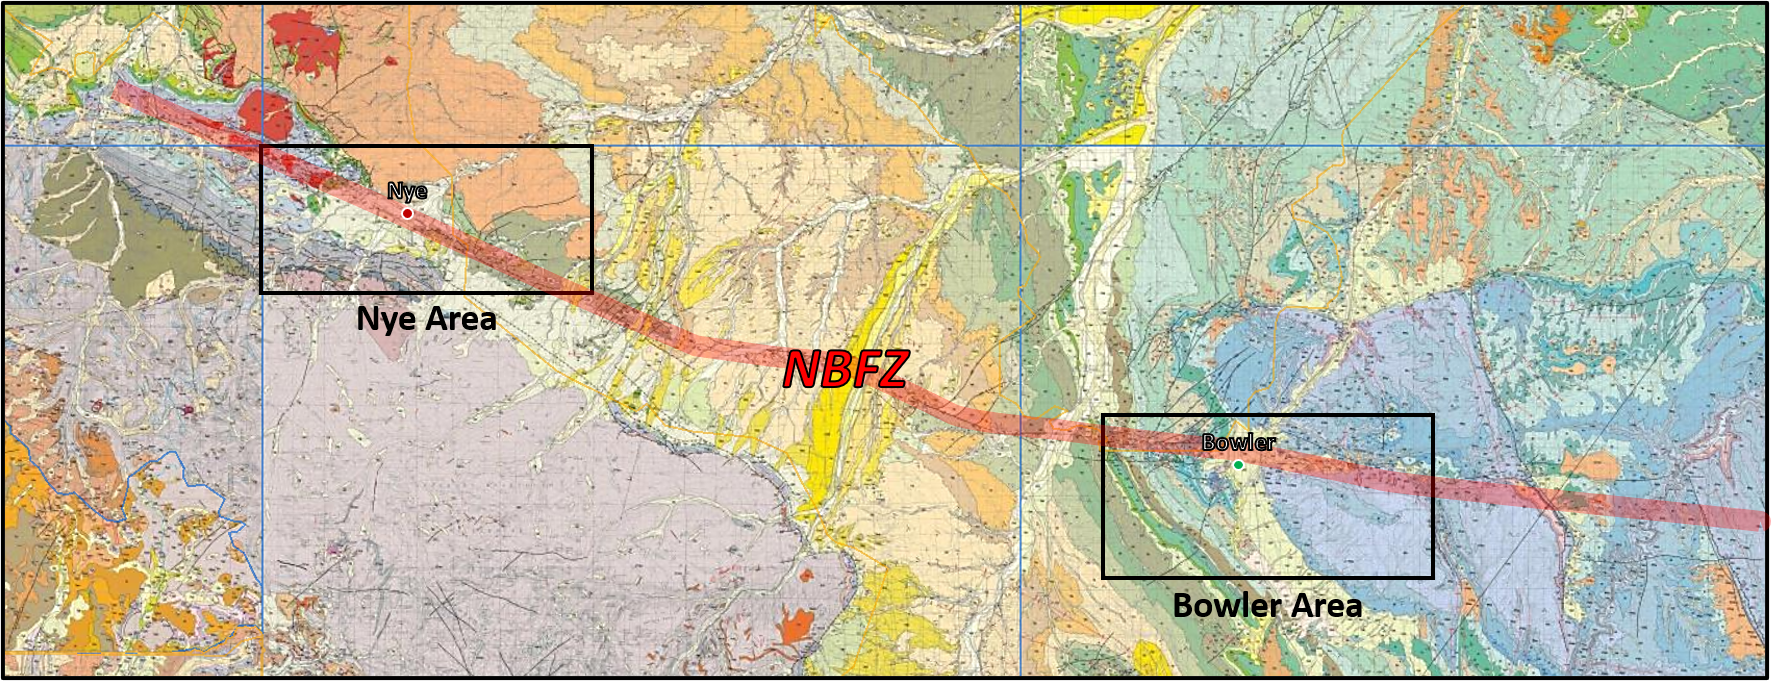 Geologic map of Nye-Bowler Fault Zone, Southern Montana